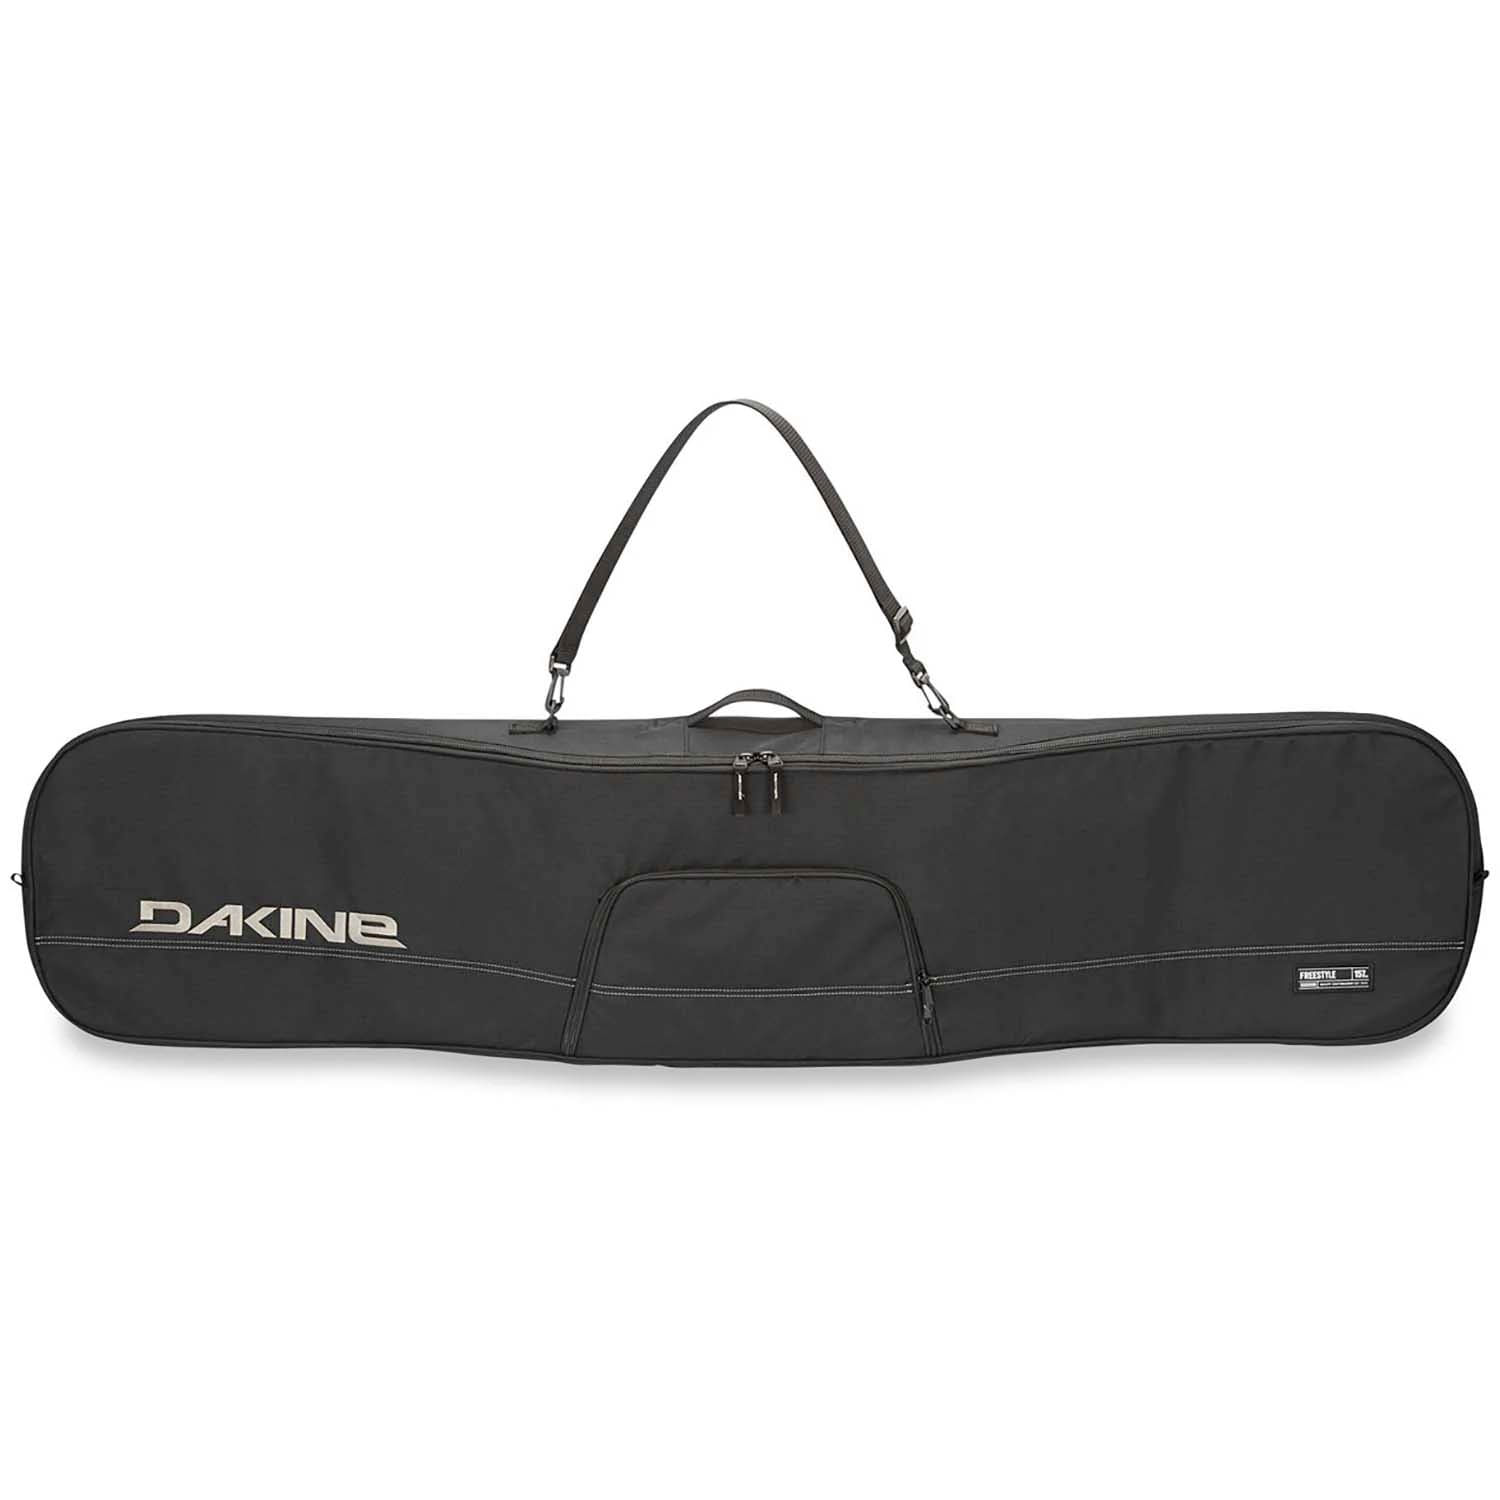 Slechthorend bod slecht humeur Dakine YOUTH FREESTYLE SNOWBOARD | Ski and Snowboard Bags